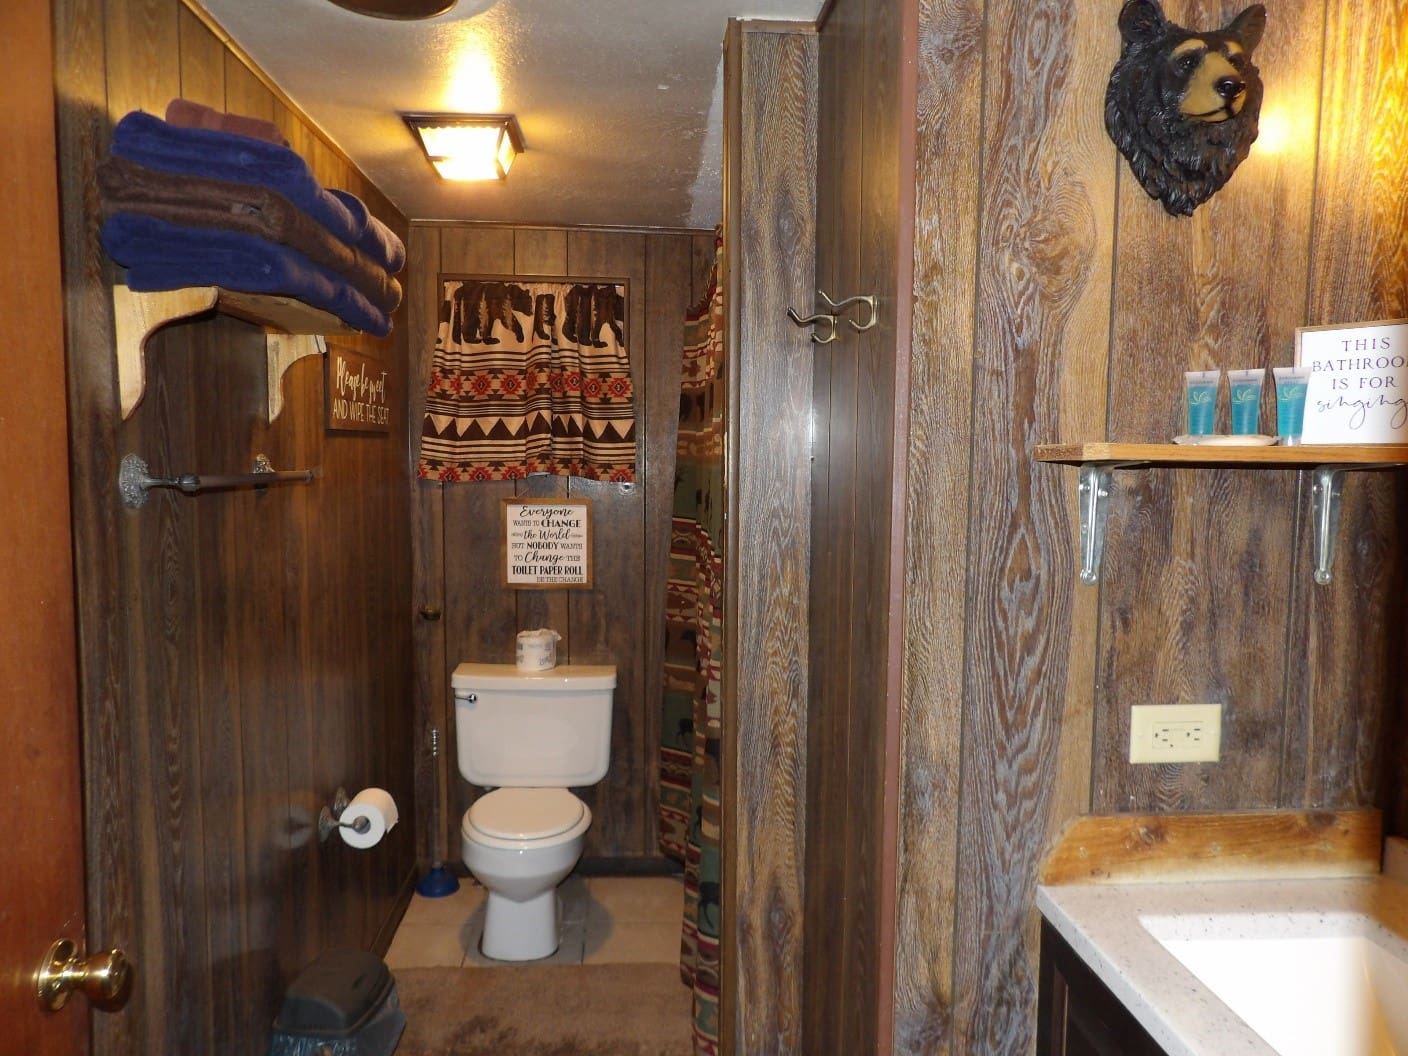 A bathroom with wood paneling and a toilet.